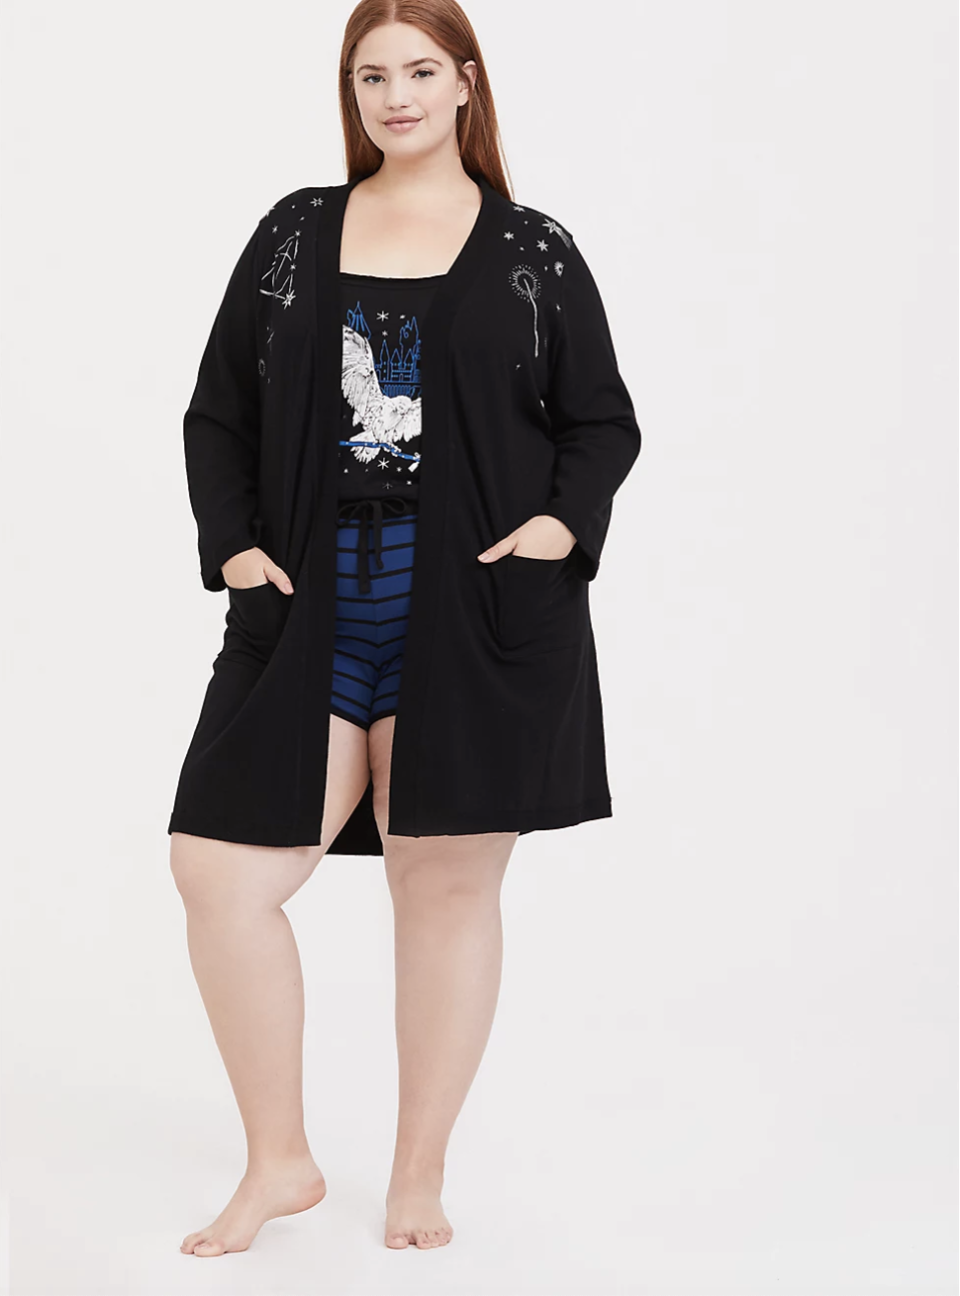 This plush robe is sure to score you some house points. (Credit: Torrid)